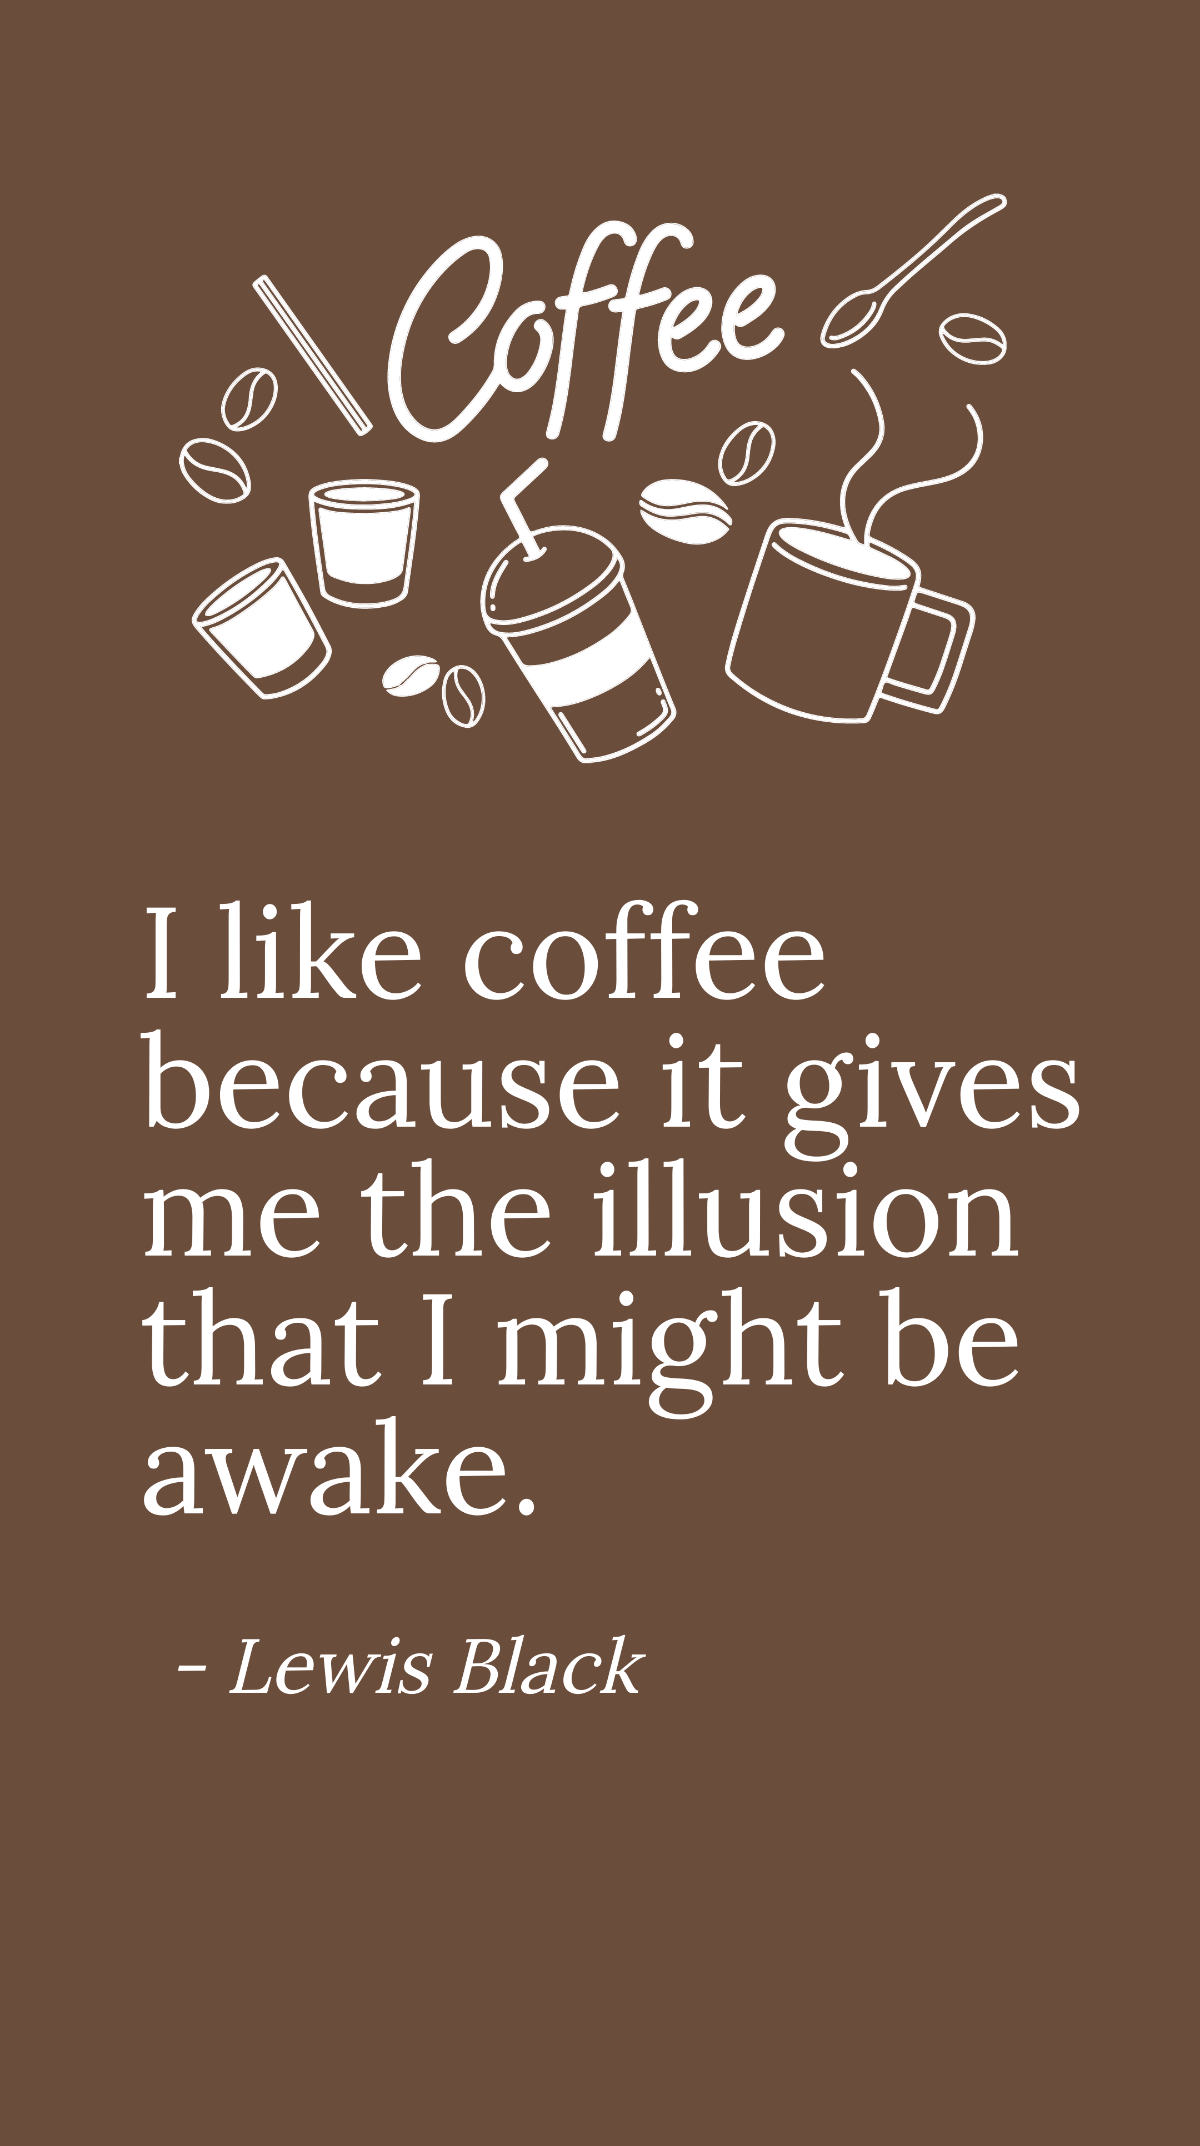 Lewis Black- I like coffee because it gives me the illusion that I might be awake.